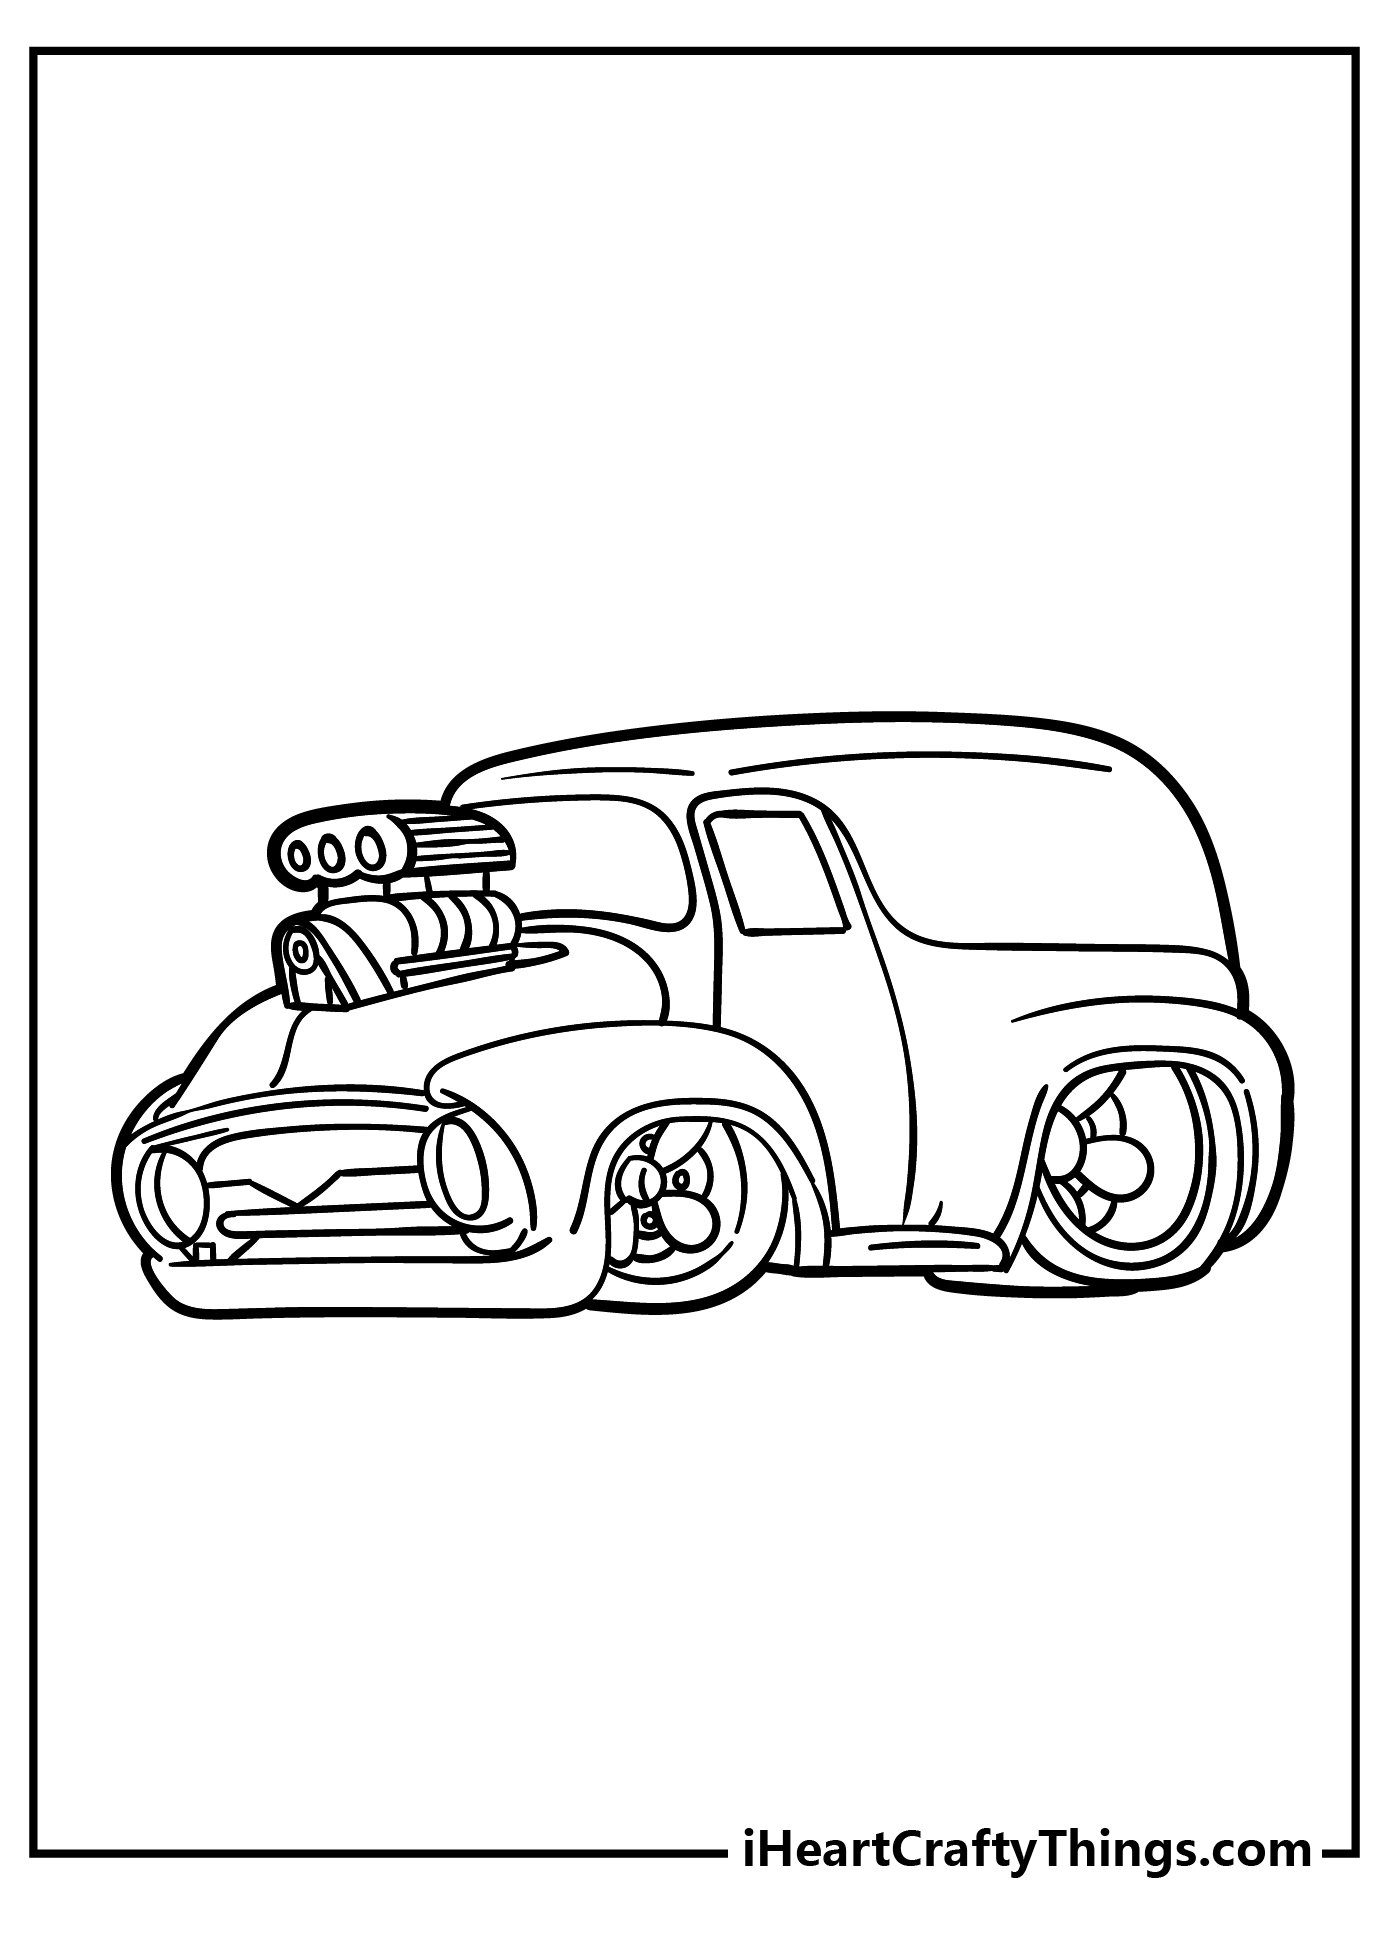 Hot Rod Coloring Sheet for children free download